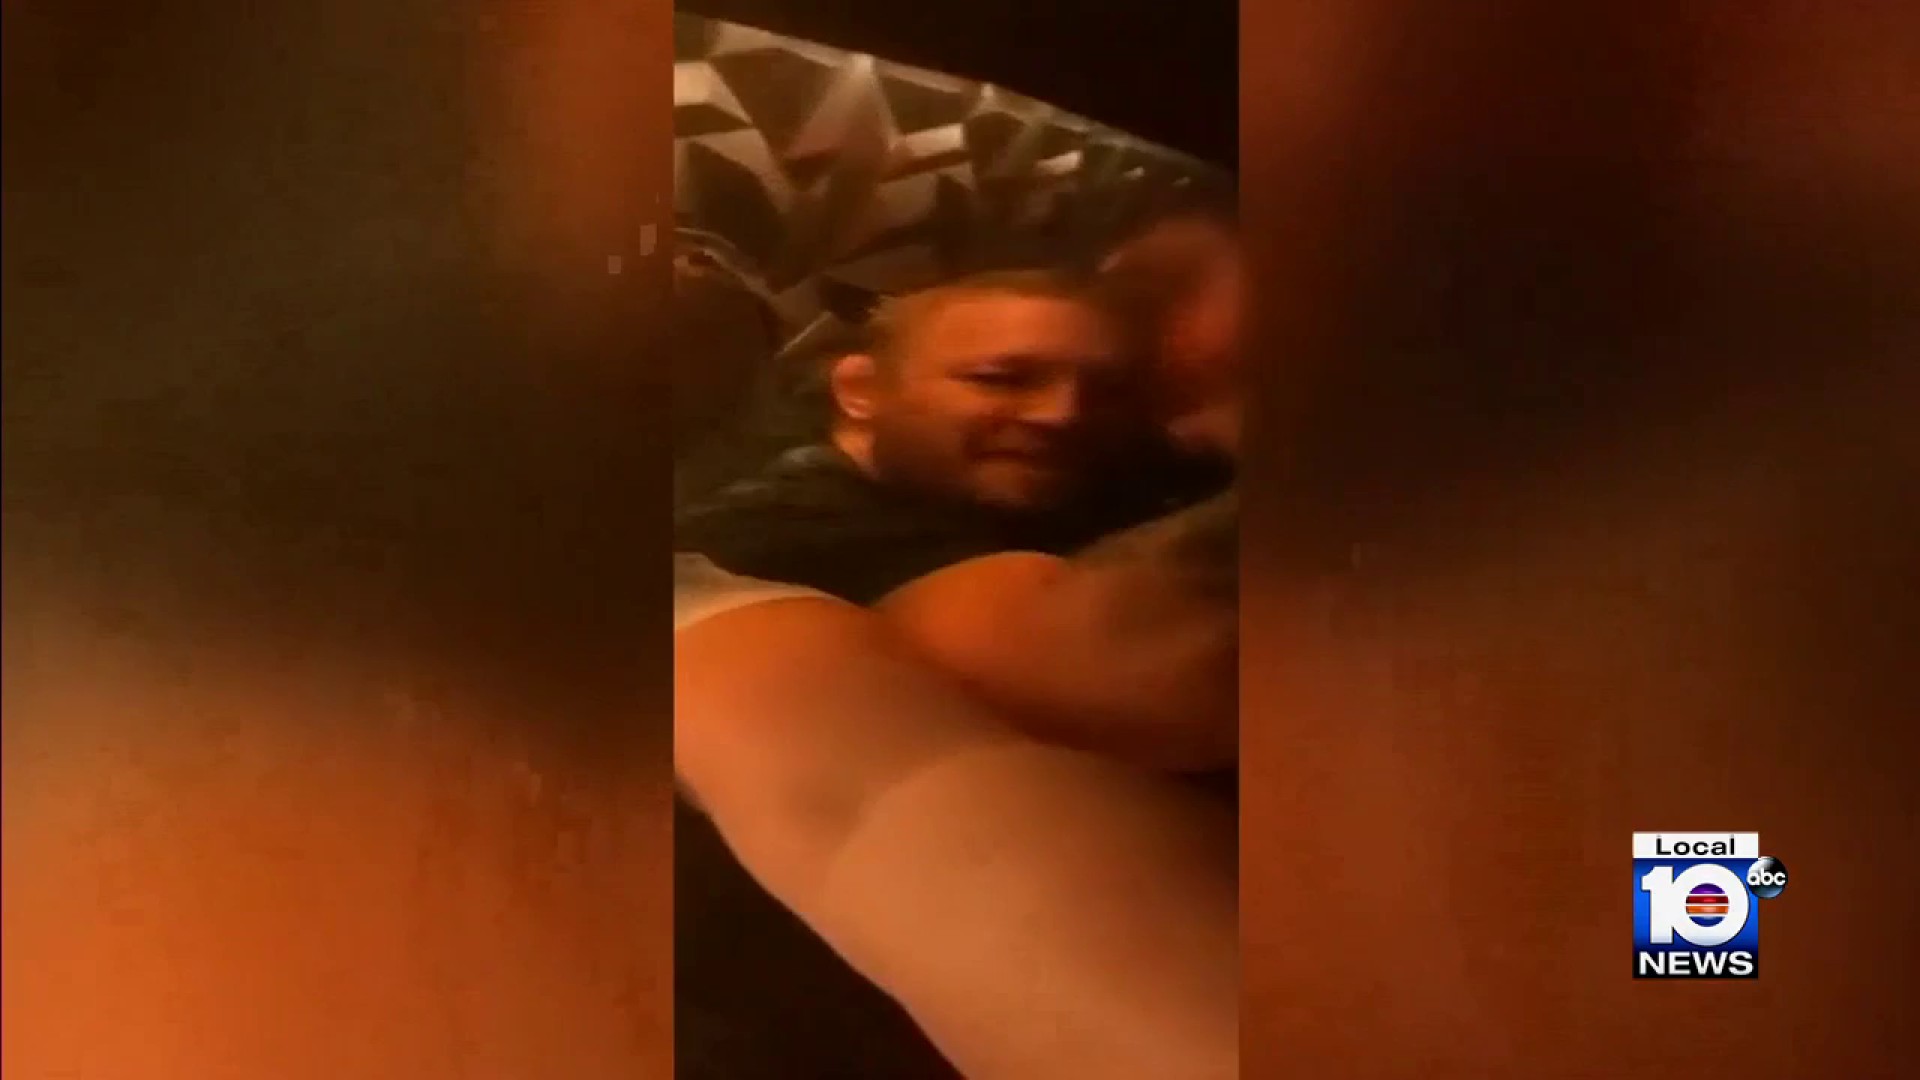 Dhorson Sex Video - More video surfaces of Conor McGregor with woman who alleges rape